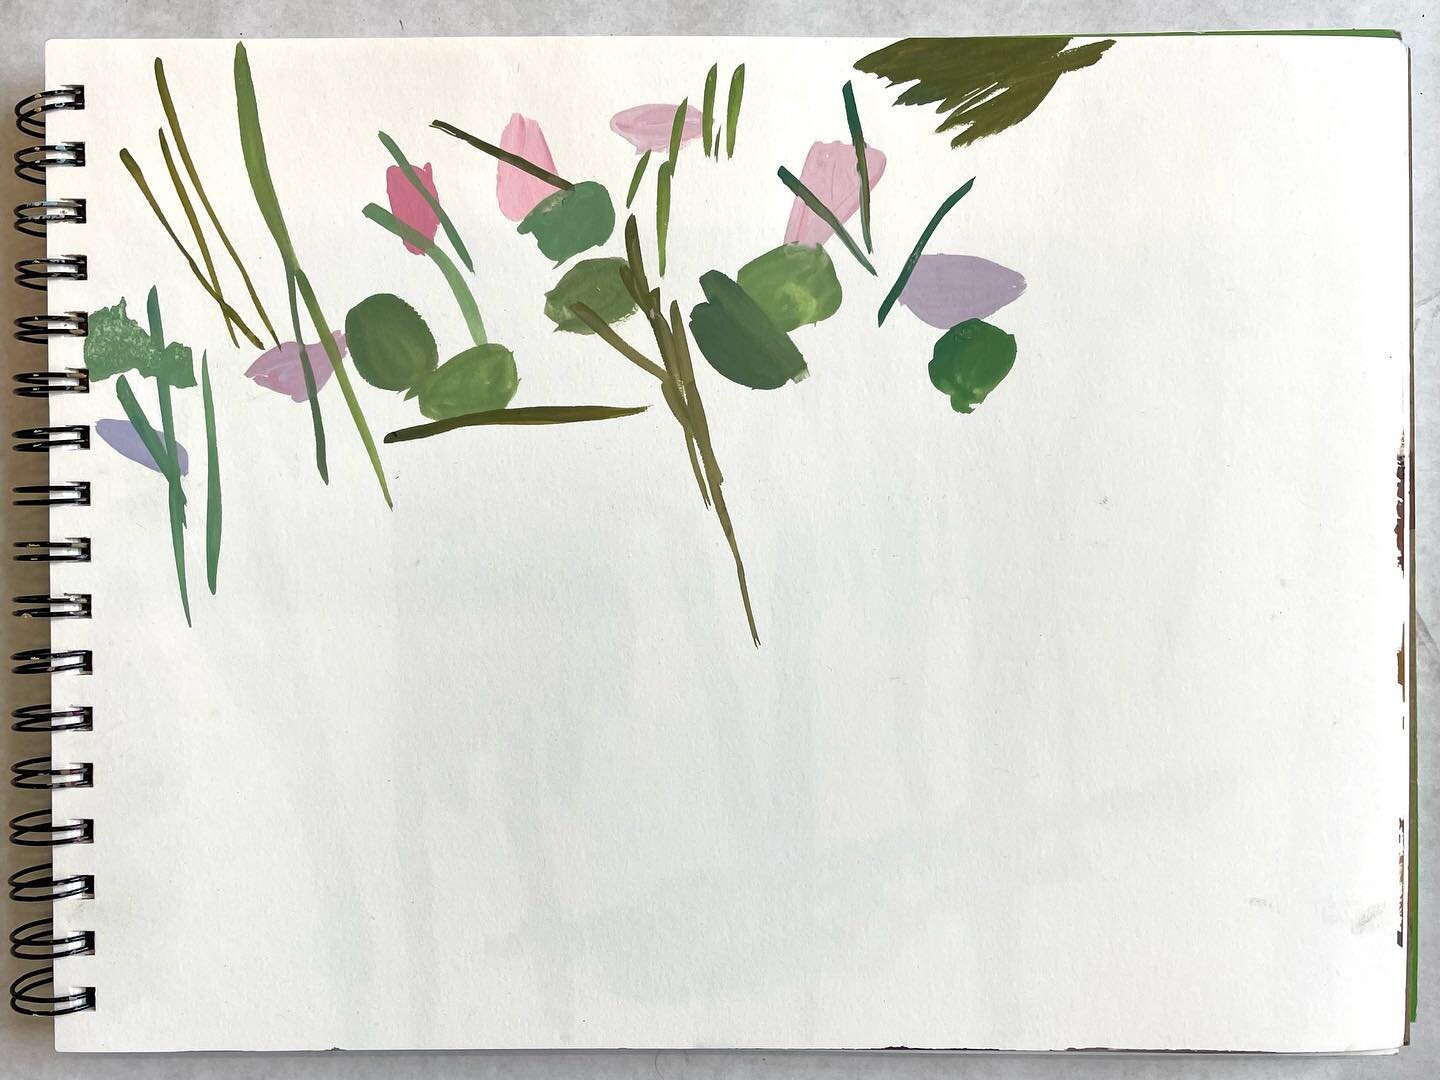 Two spring sketches, gouache on paper 🌿
.
.
.
#contemporarypainting 
#landscapepainting
#paintingplaces